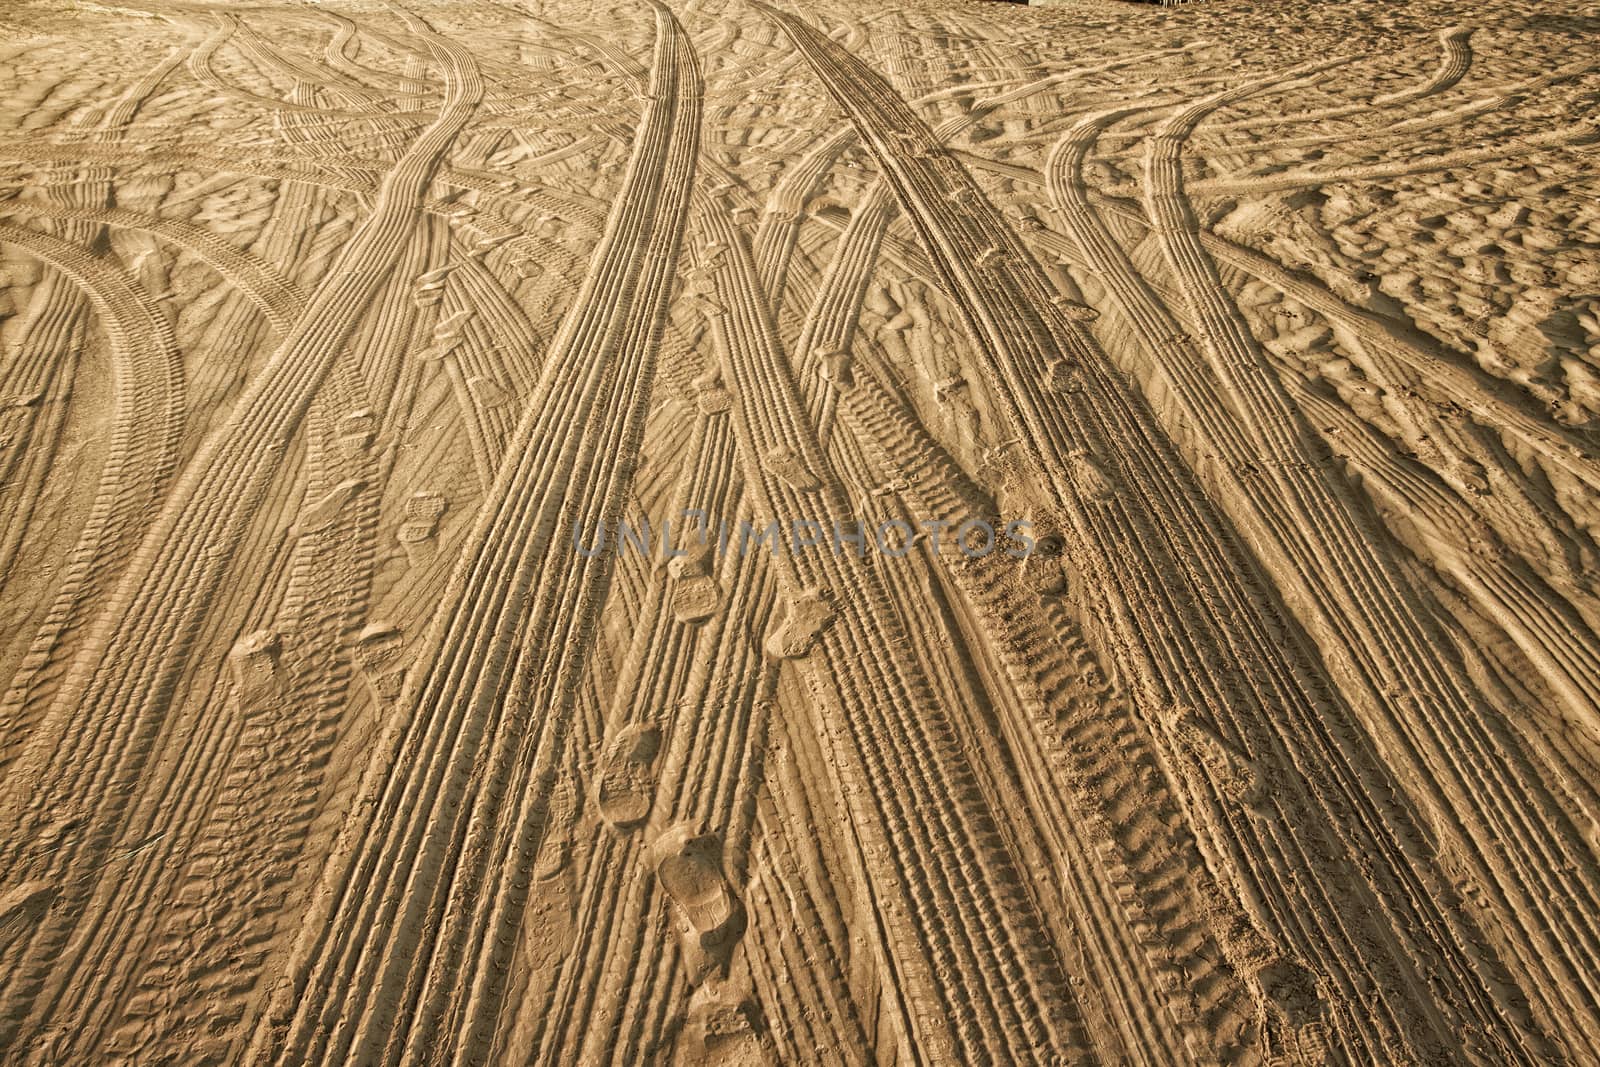 Tracks of cars on the sand in the desert by Tjeerdkruse